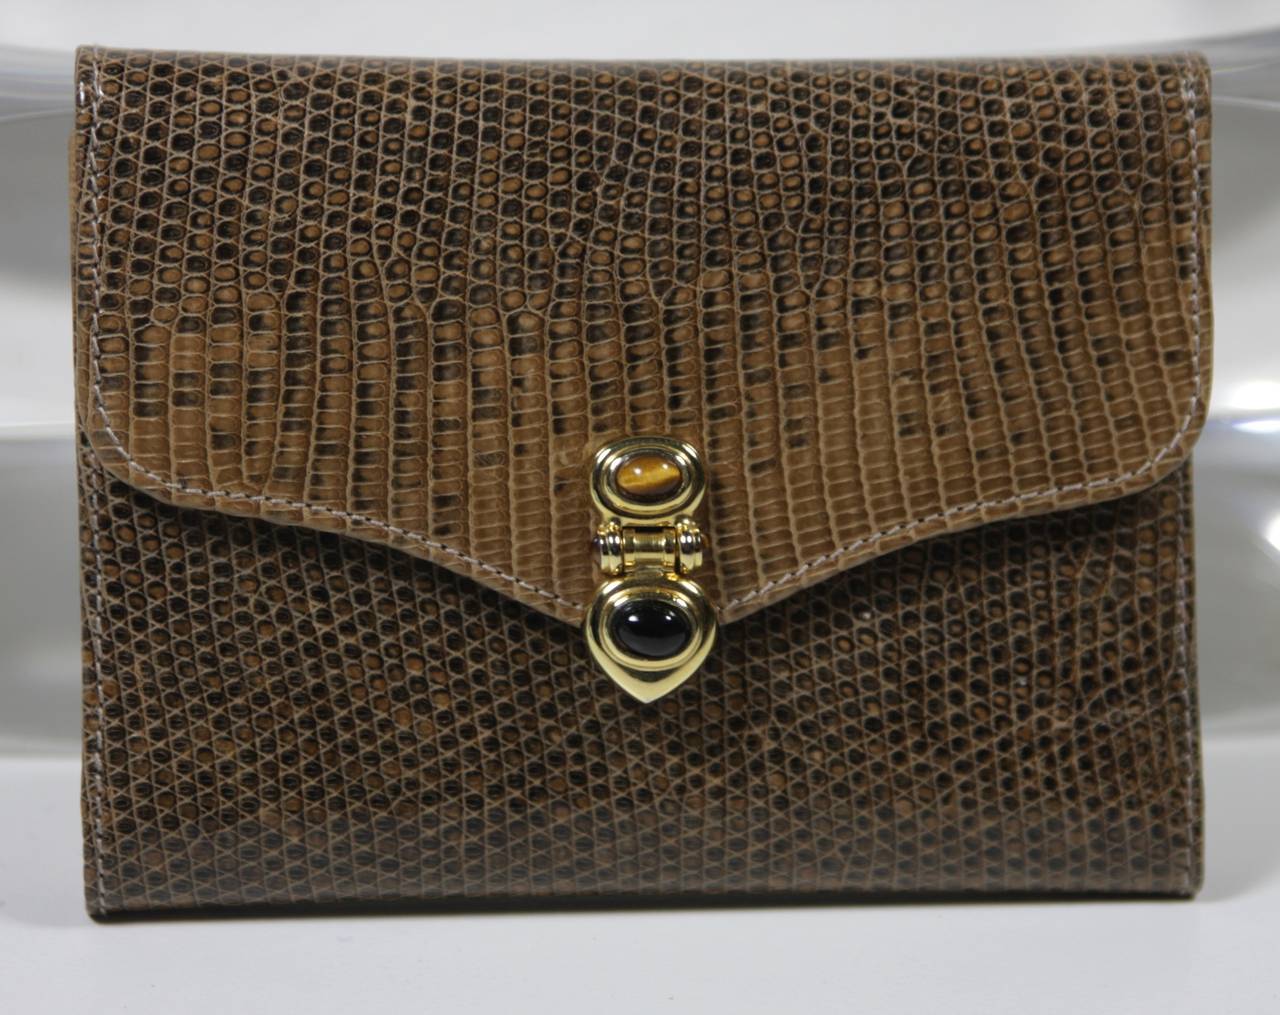 This vintage Judith Leiber is available for viewing at our Beverly Hills Boutique. We offer a large selection of evening gowns and luxury garments.

This wallet is composed of brown lizard skin and features gold hardware. The clasp is accented